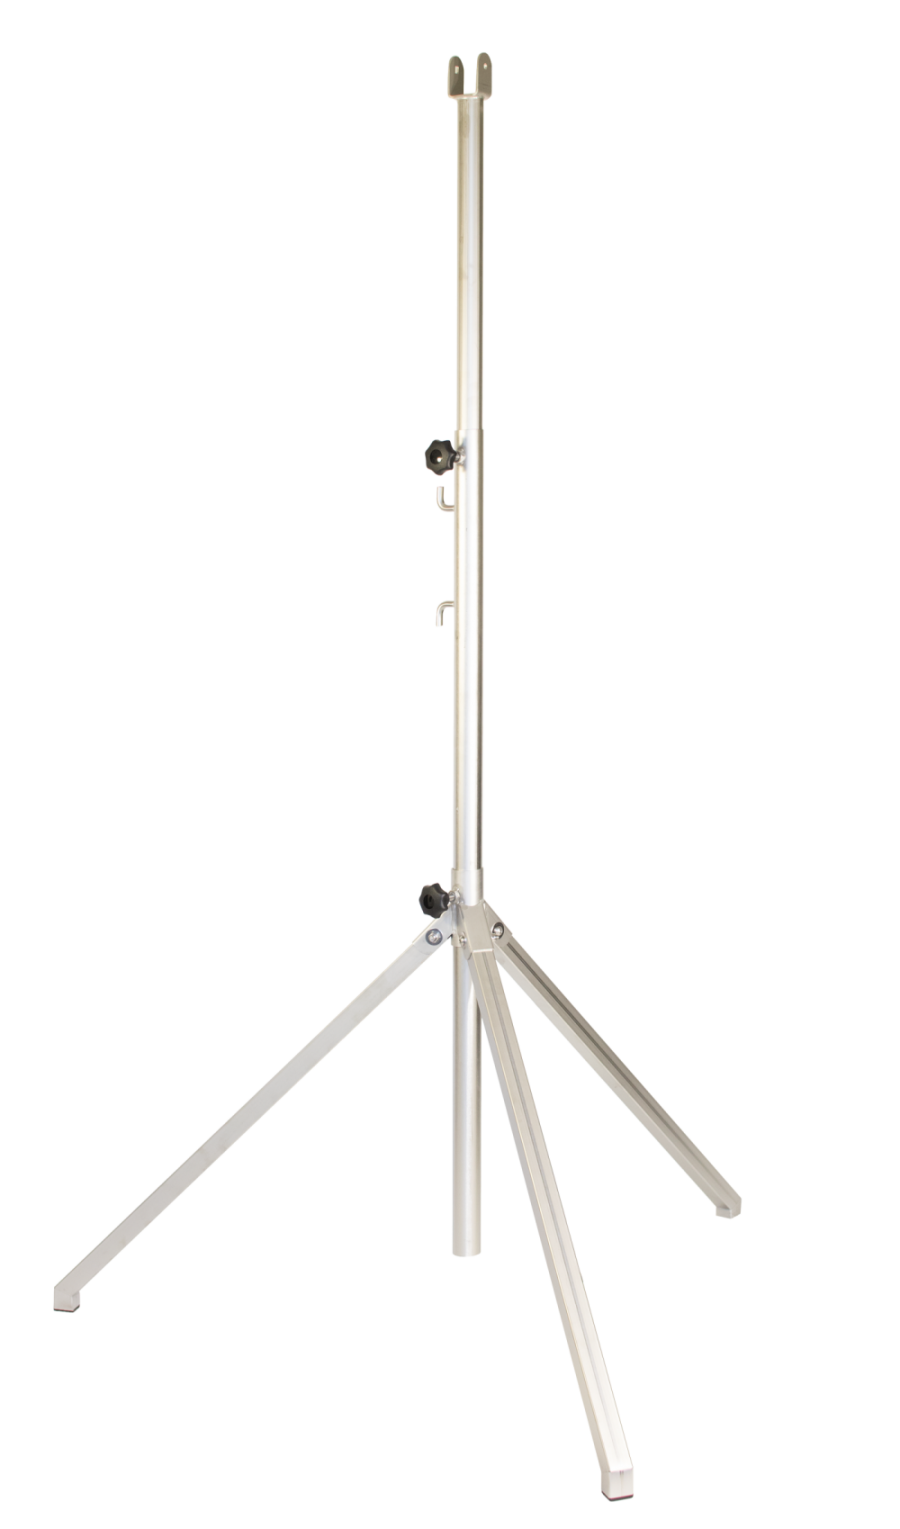 Stainless steel tripod 6960516 for Ultra2/3/XL